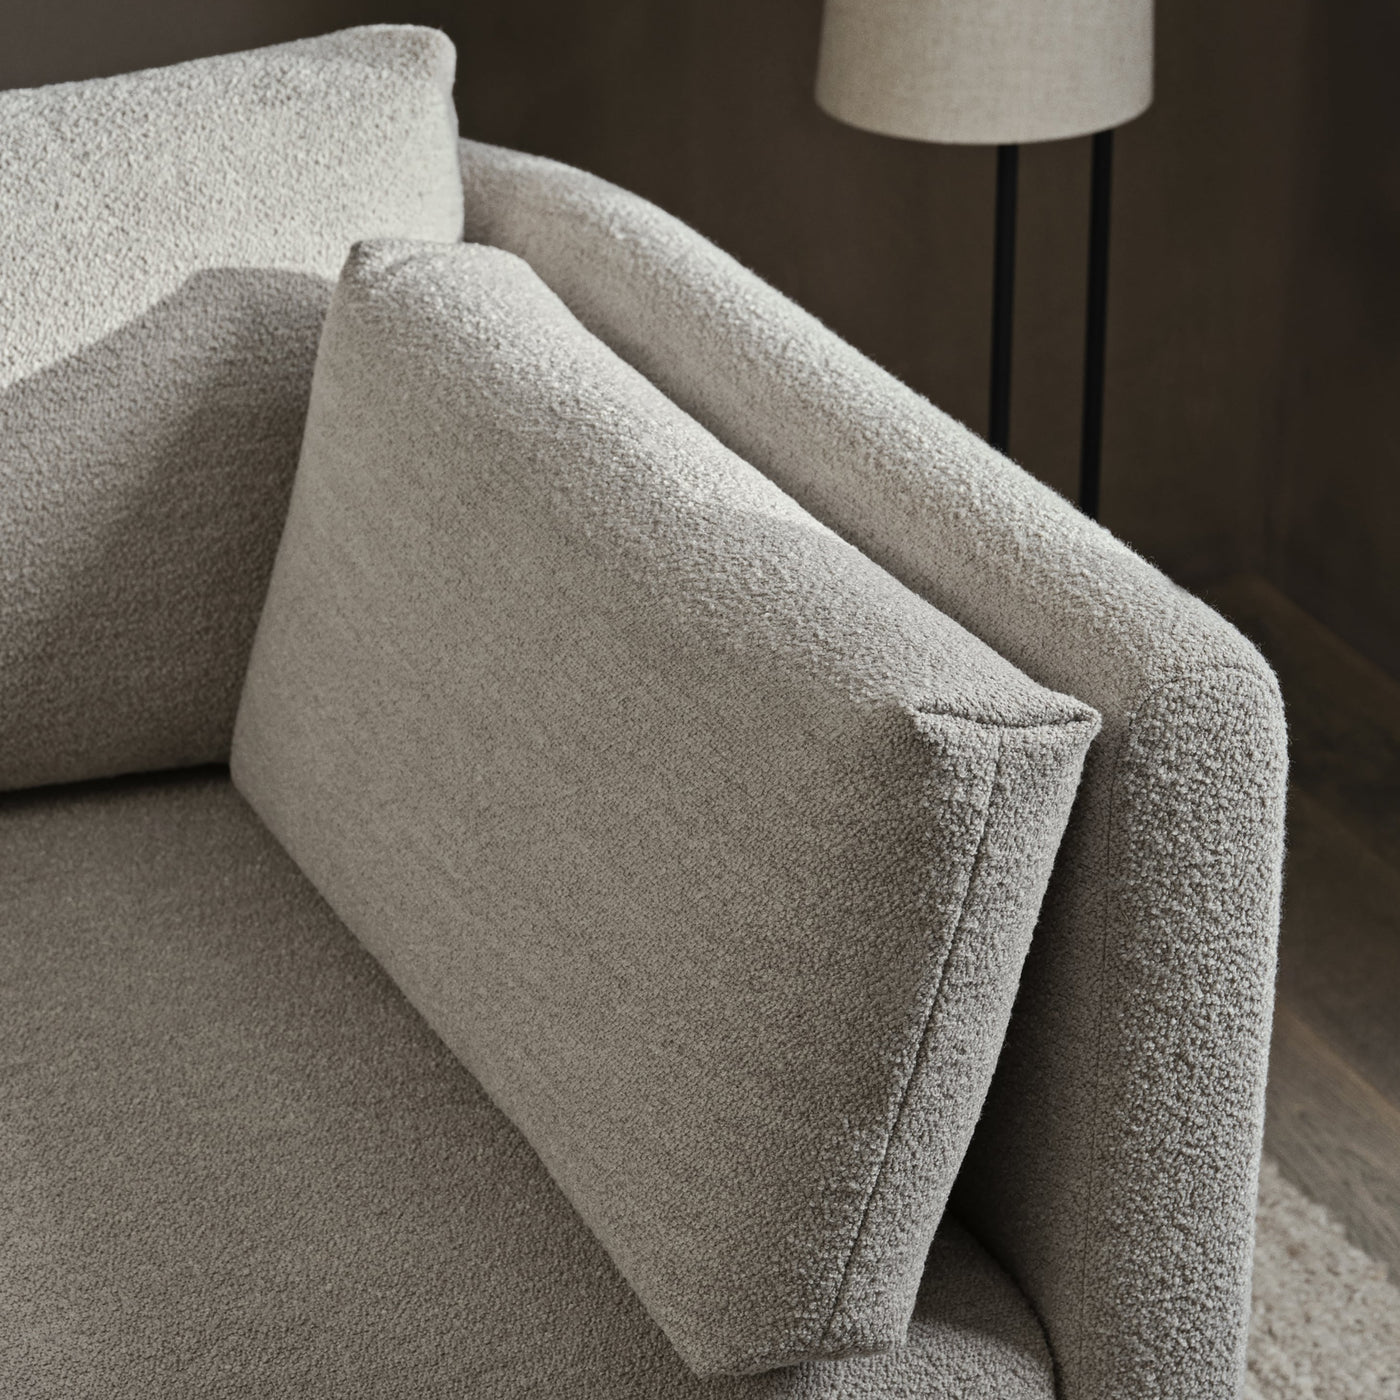 Dase Scatter Cushion for Dase Modular Sofa by fermLIVING soft boucle lifestyle image detail shot